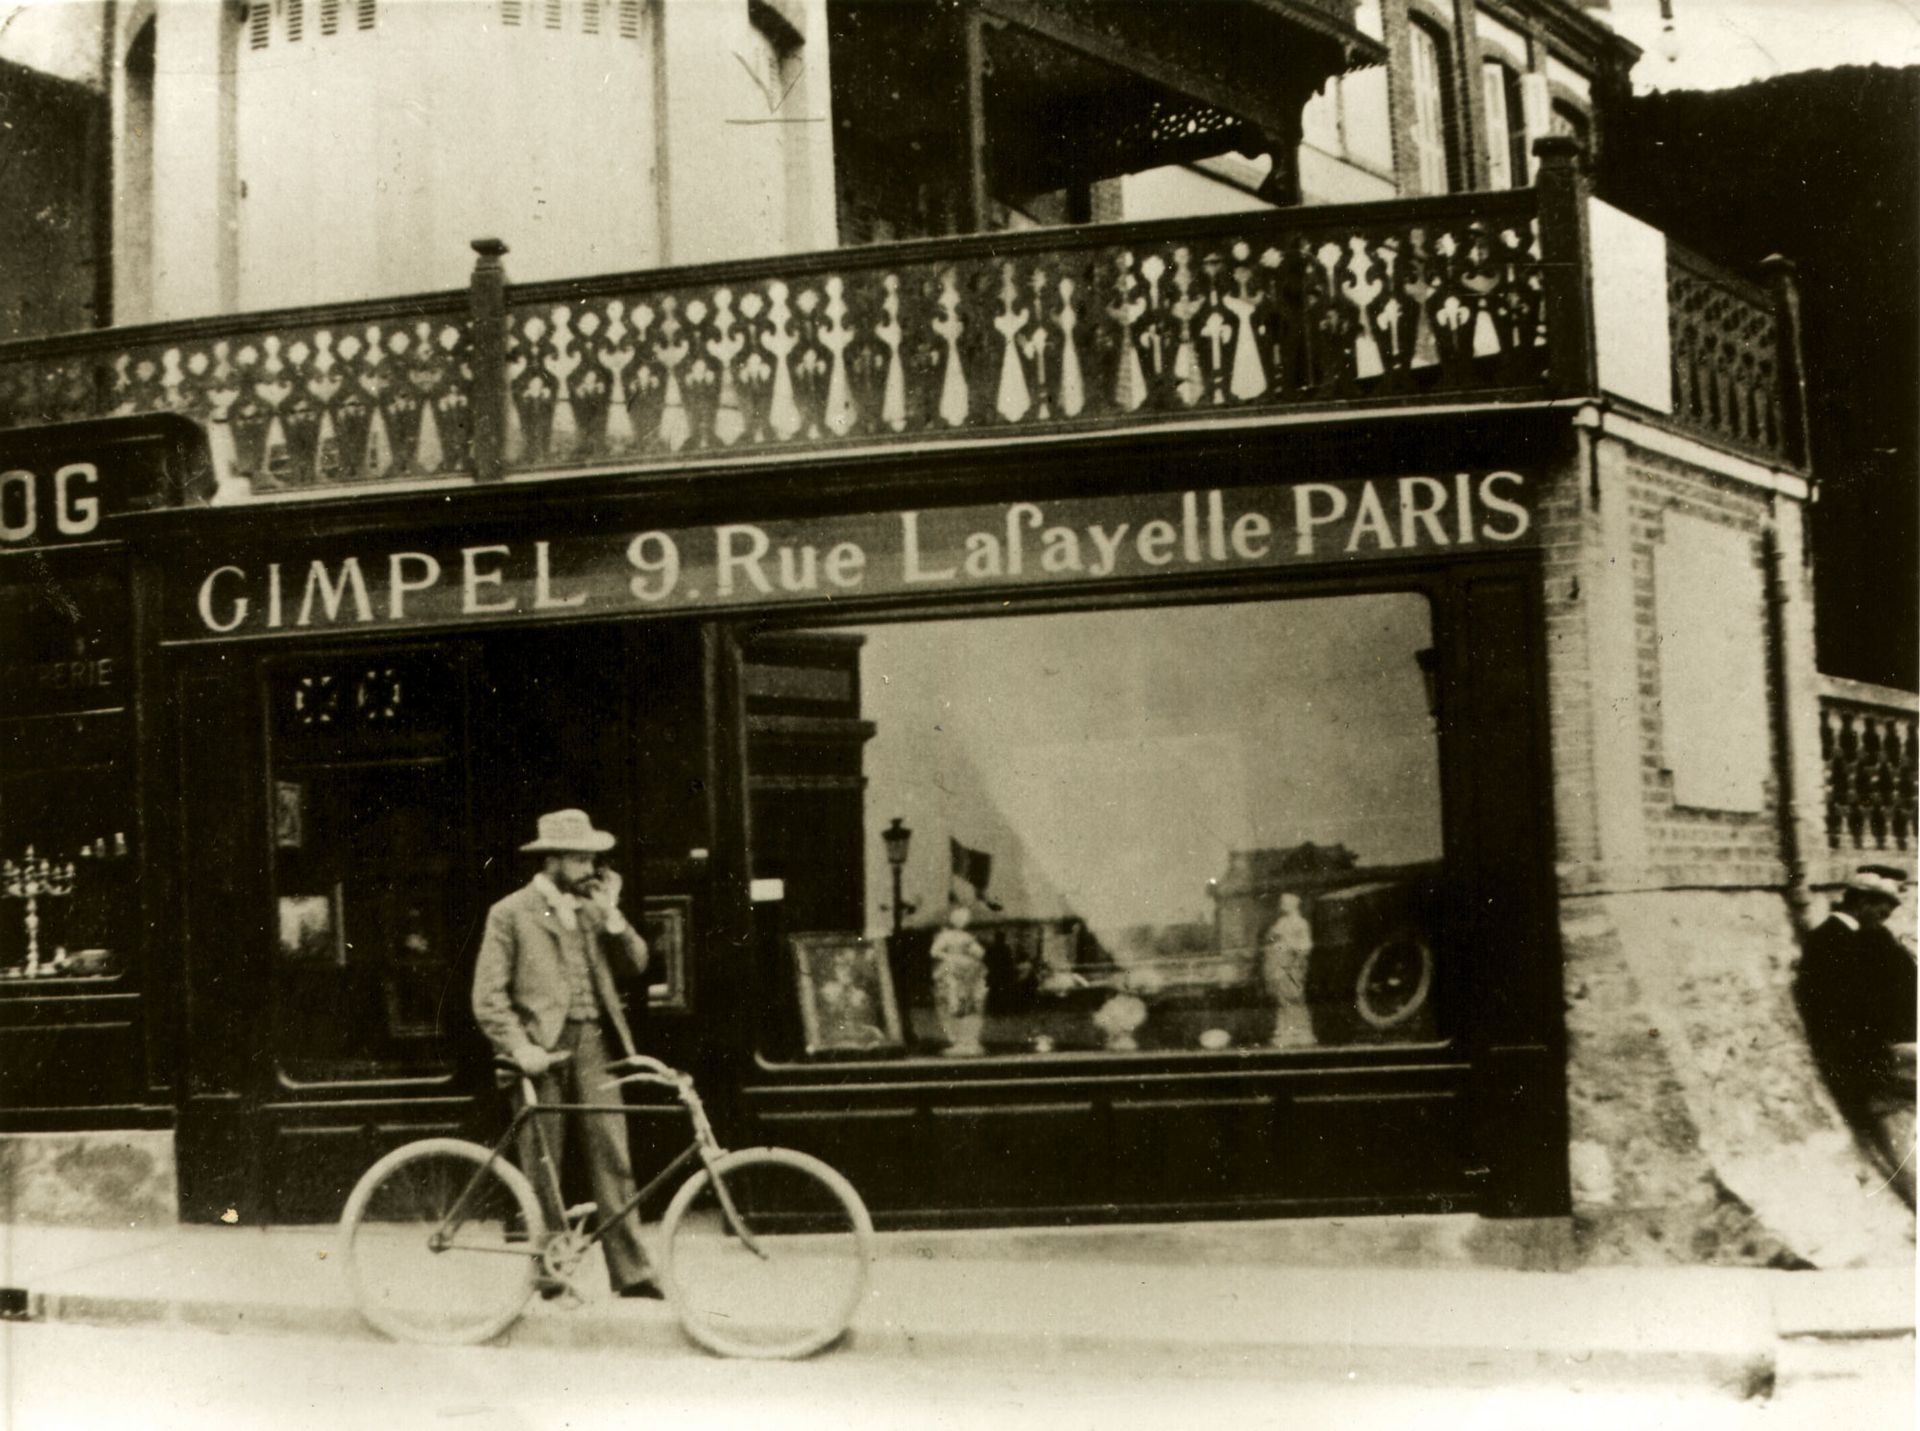 The Gimpel Gallery in Trouville-sur-Mer, Calvados, around 1900 Gimpel family archives/Archives of American Art; Smithsonian Institution